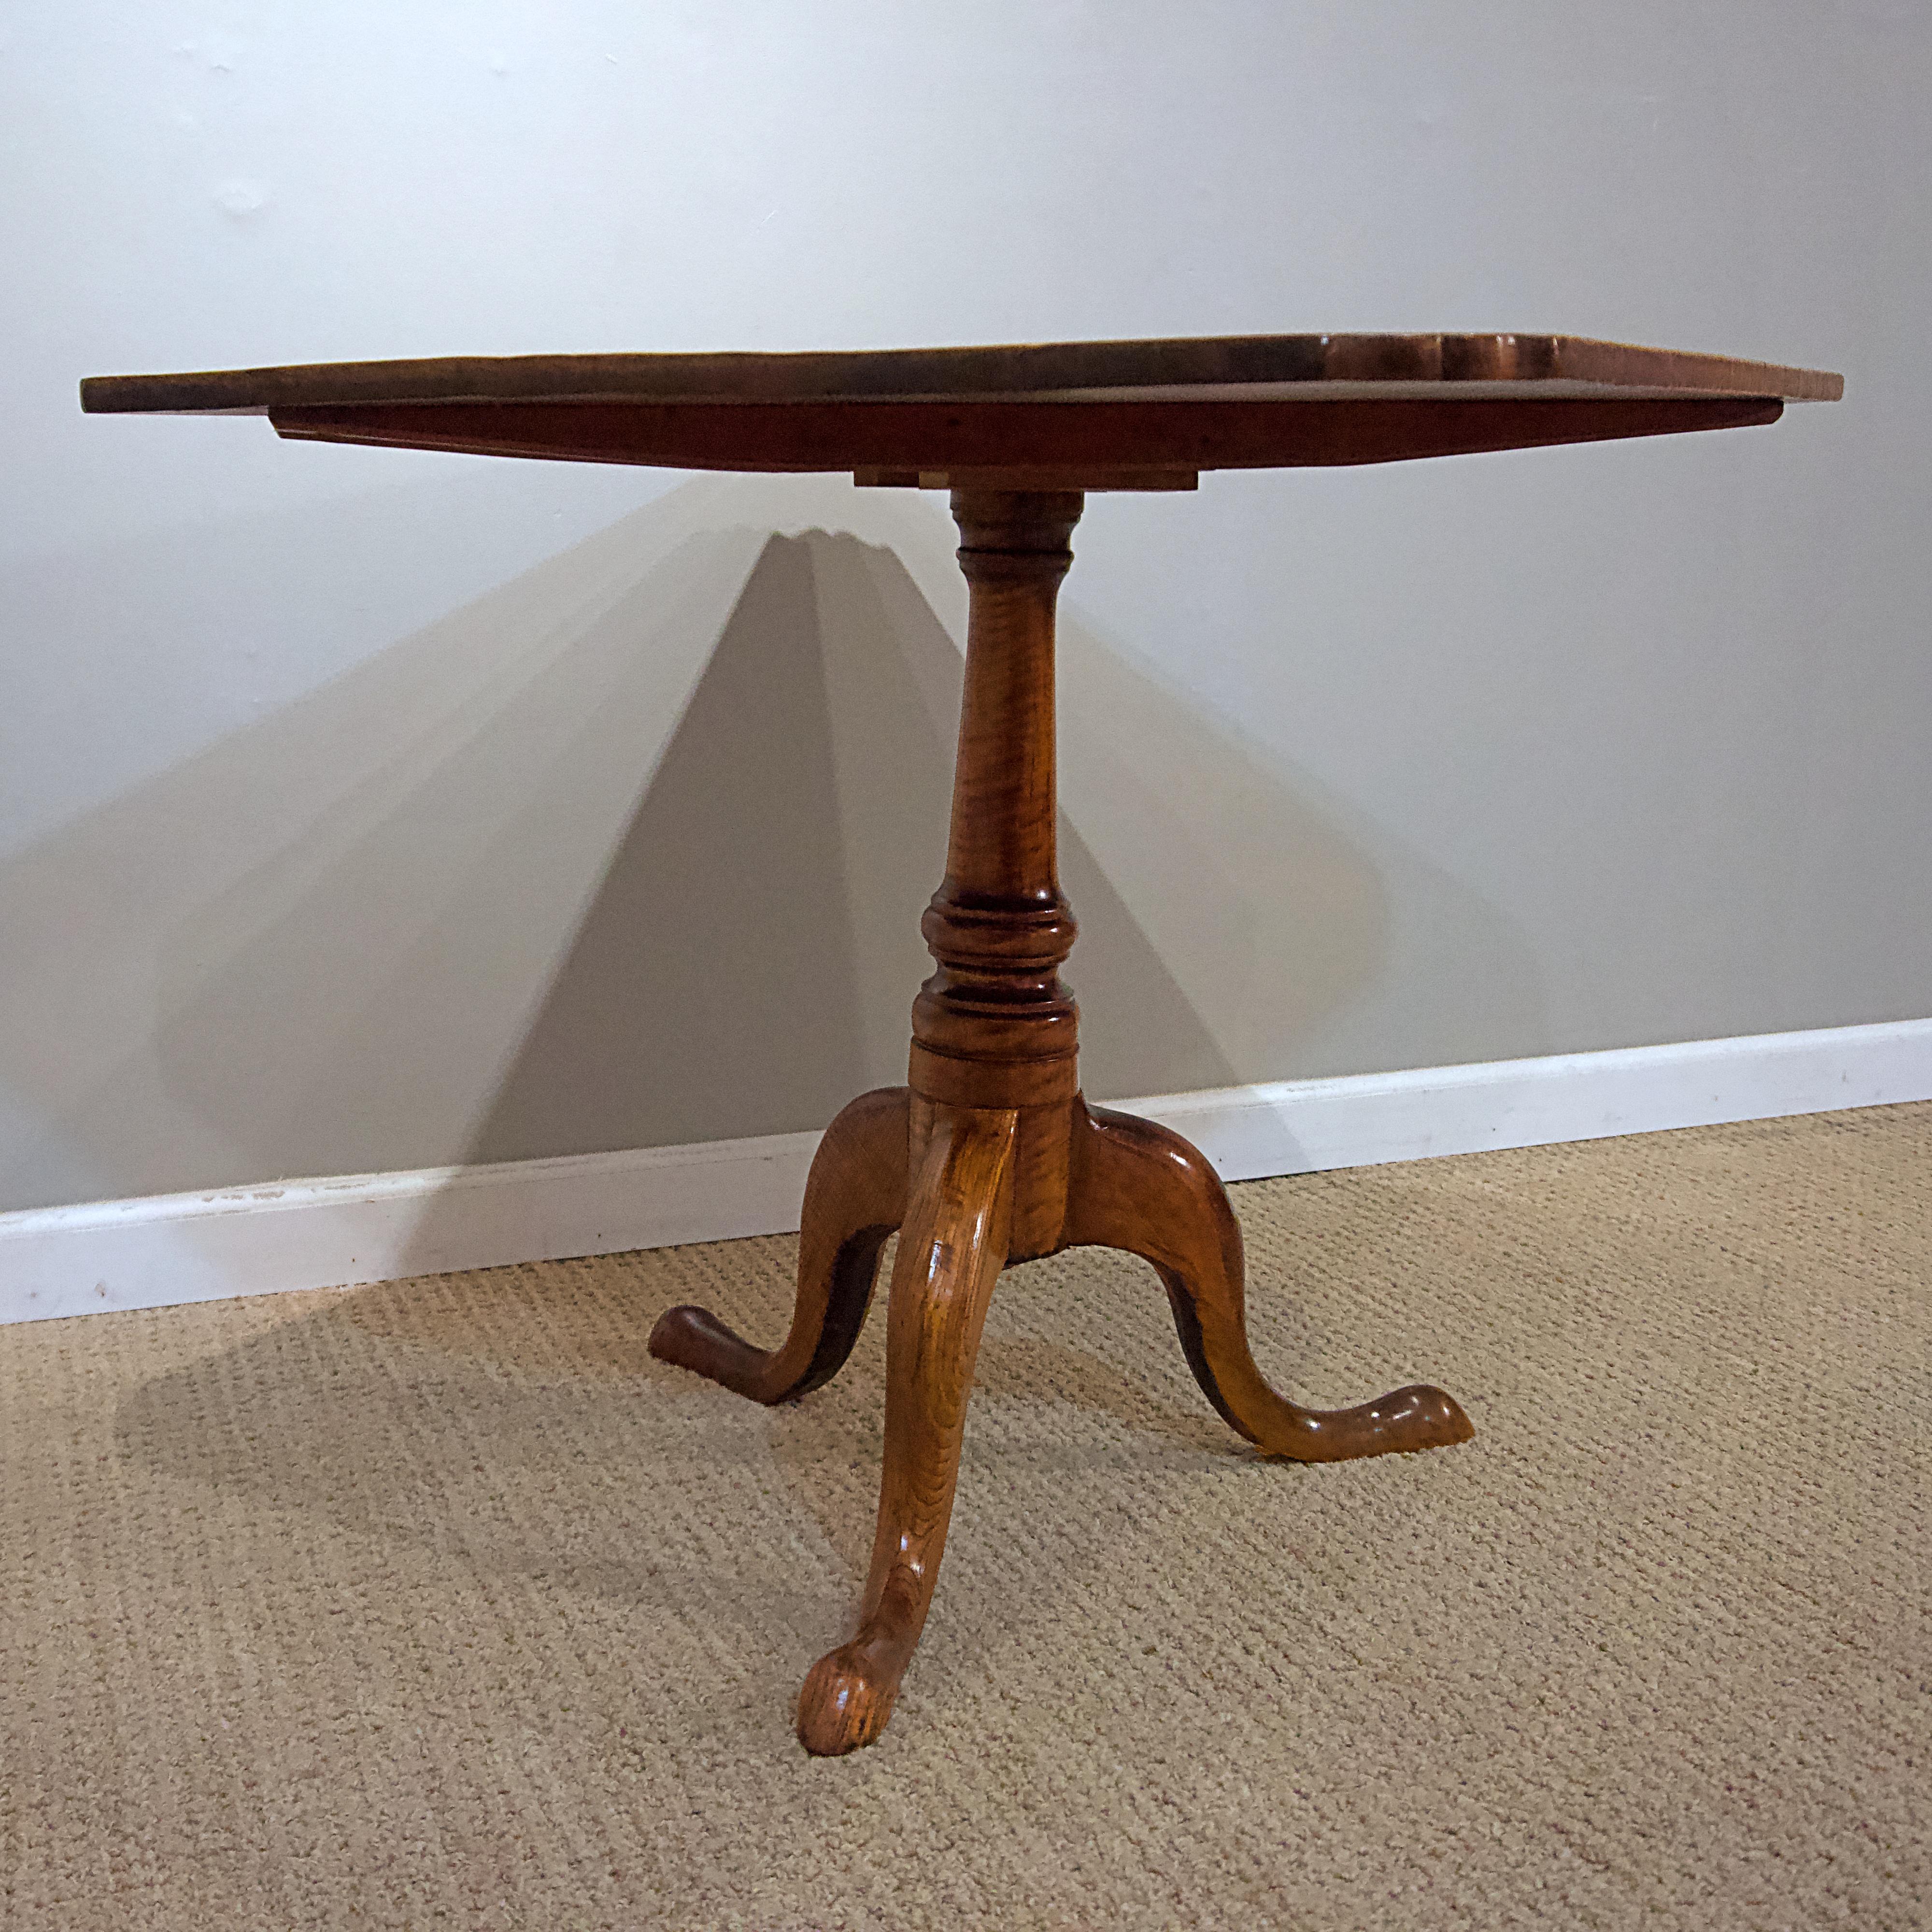 Polished American Federal Tiger Maple Tripod Table